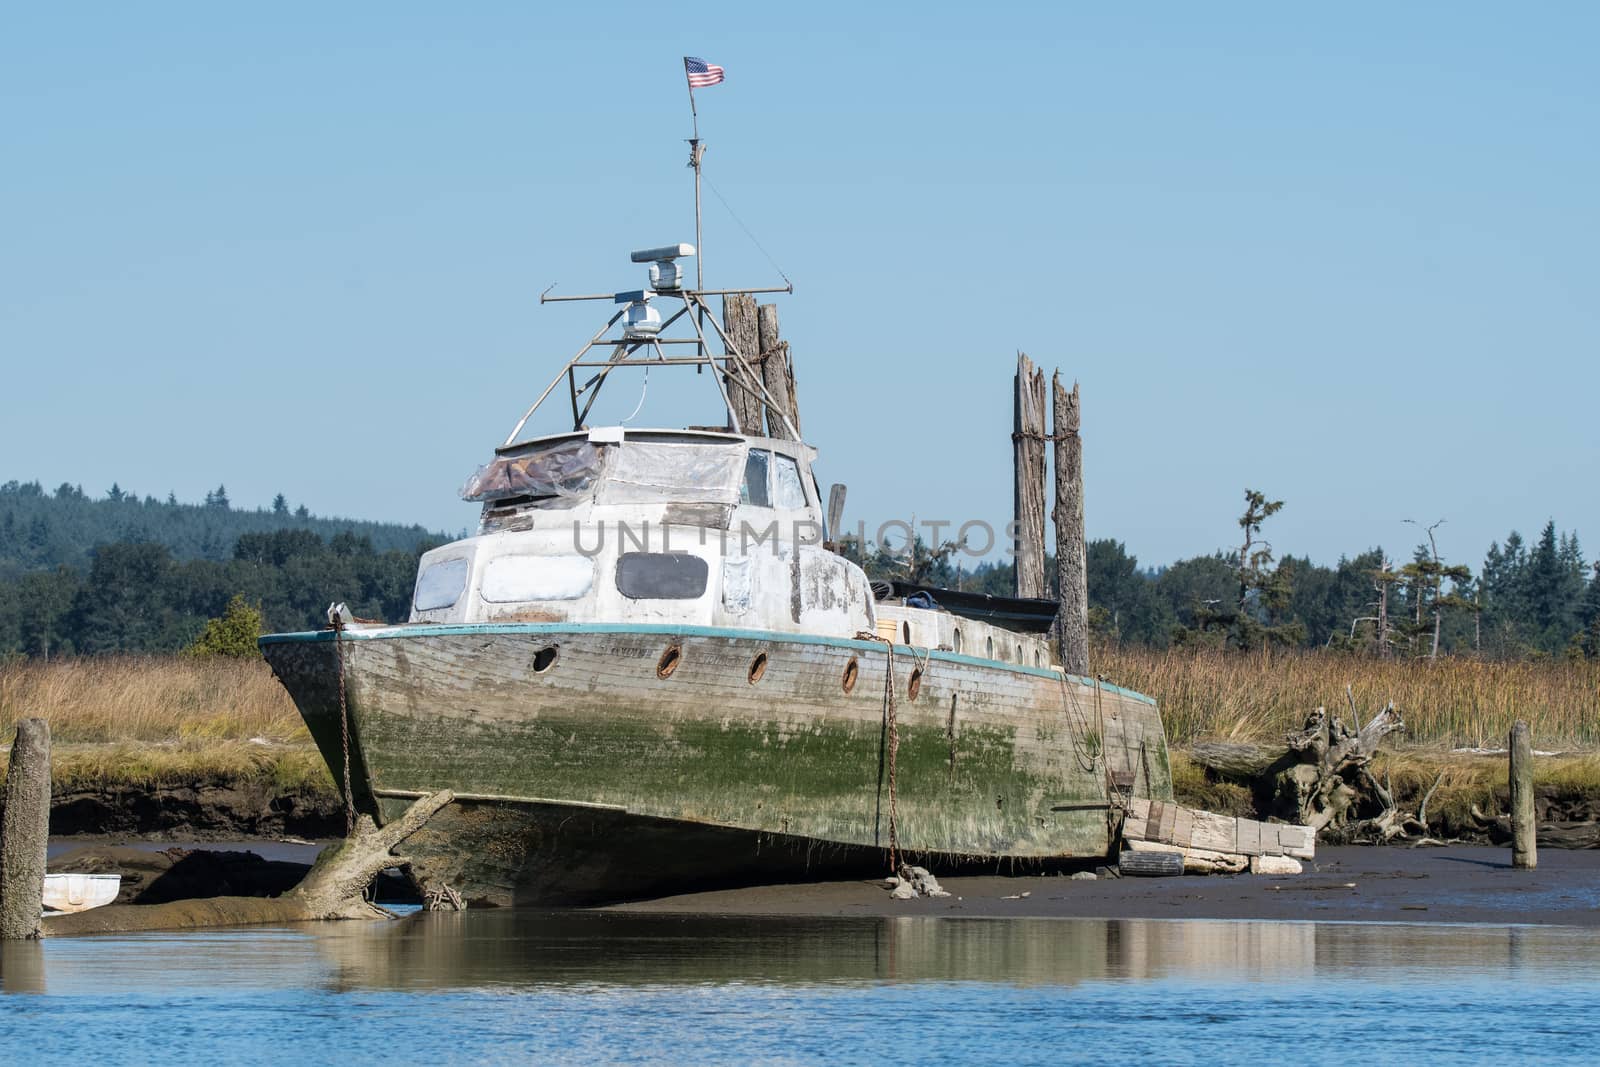 Derelict Vessel on Steamboat Slough by cestes001